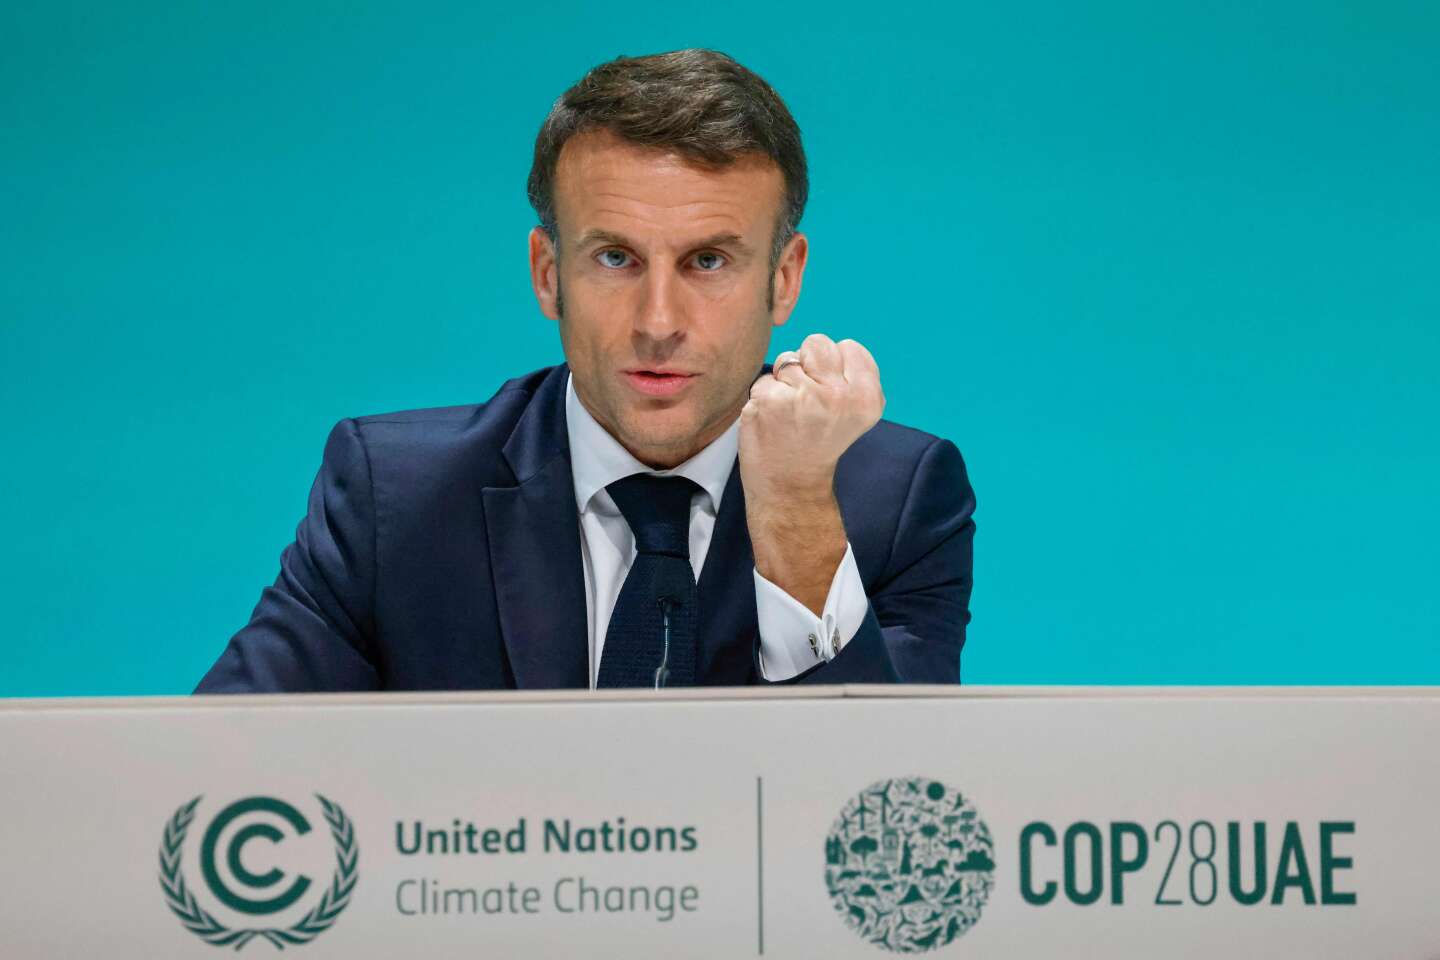 At COP28, Emmanuel Macron lists France’s priorities to deal with climate change